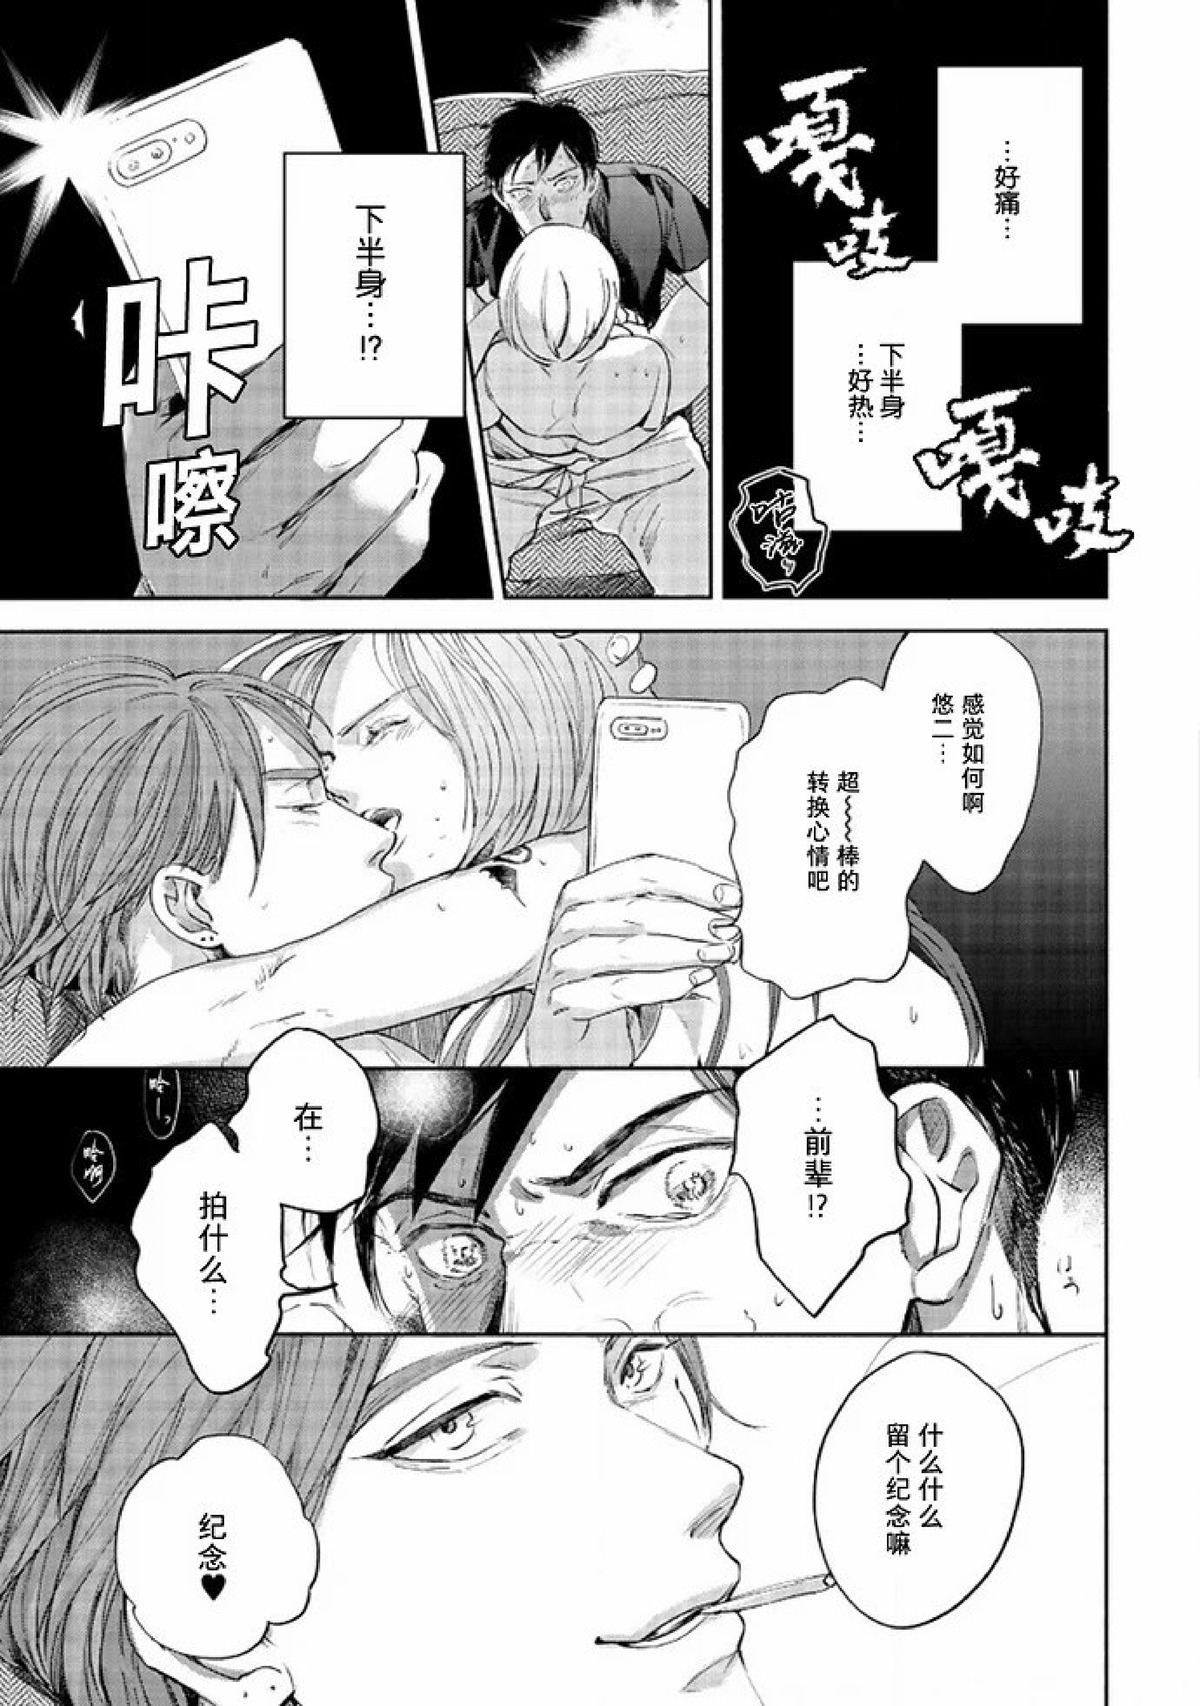 【Two sides of the same coin[耽美]】漫画-（上卷01-02）章节漫画下拉式图片-45.jpg